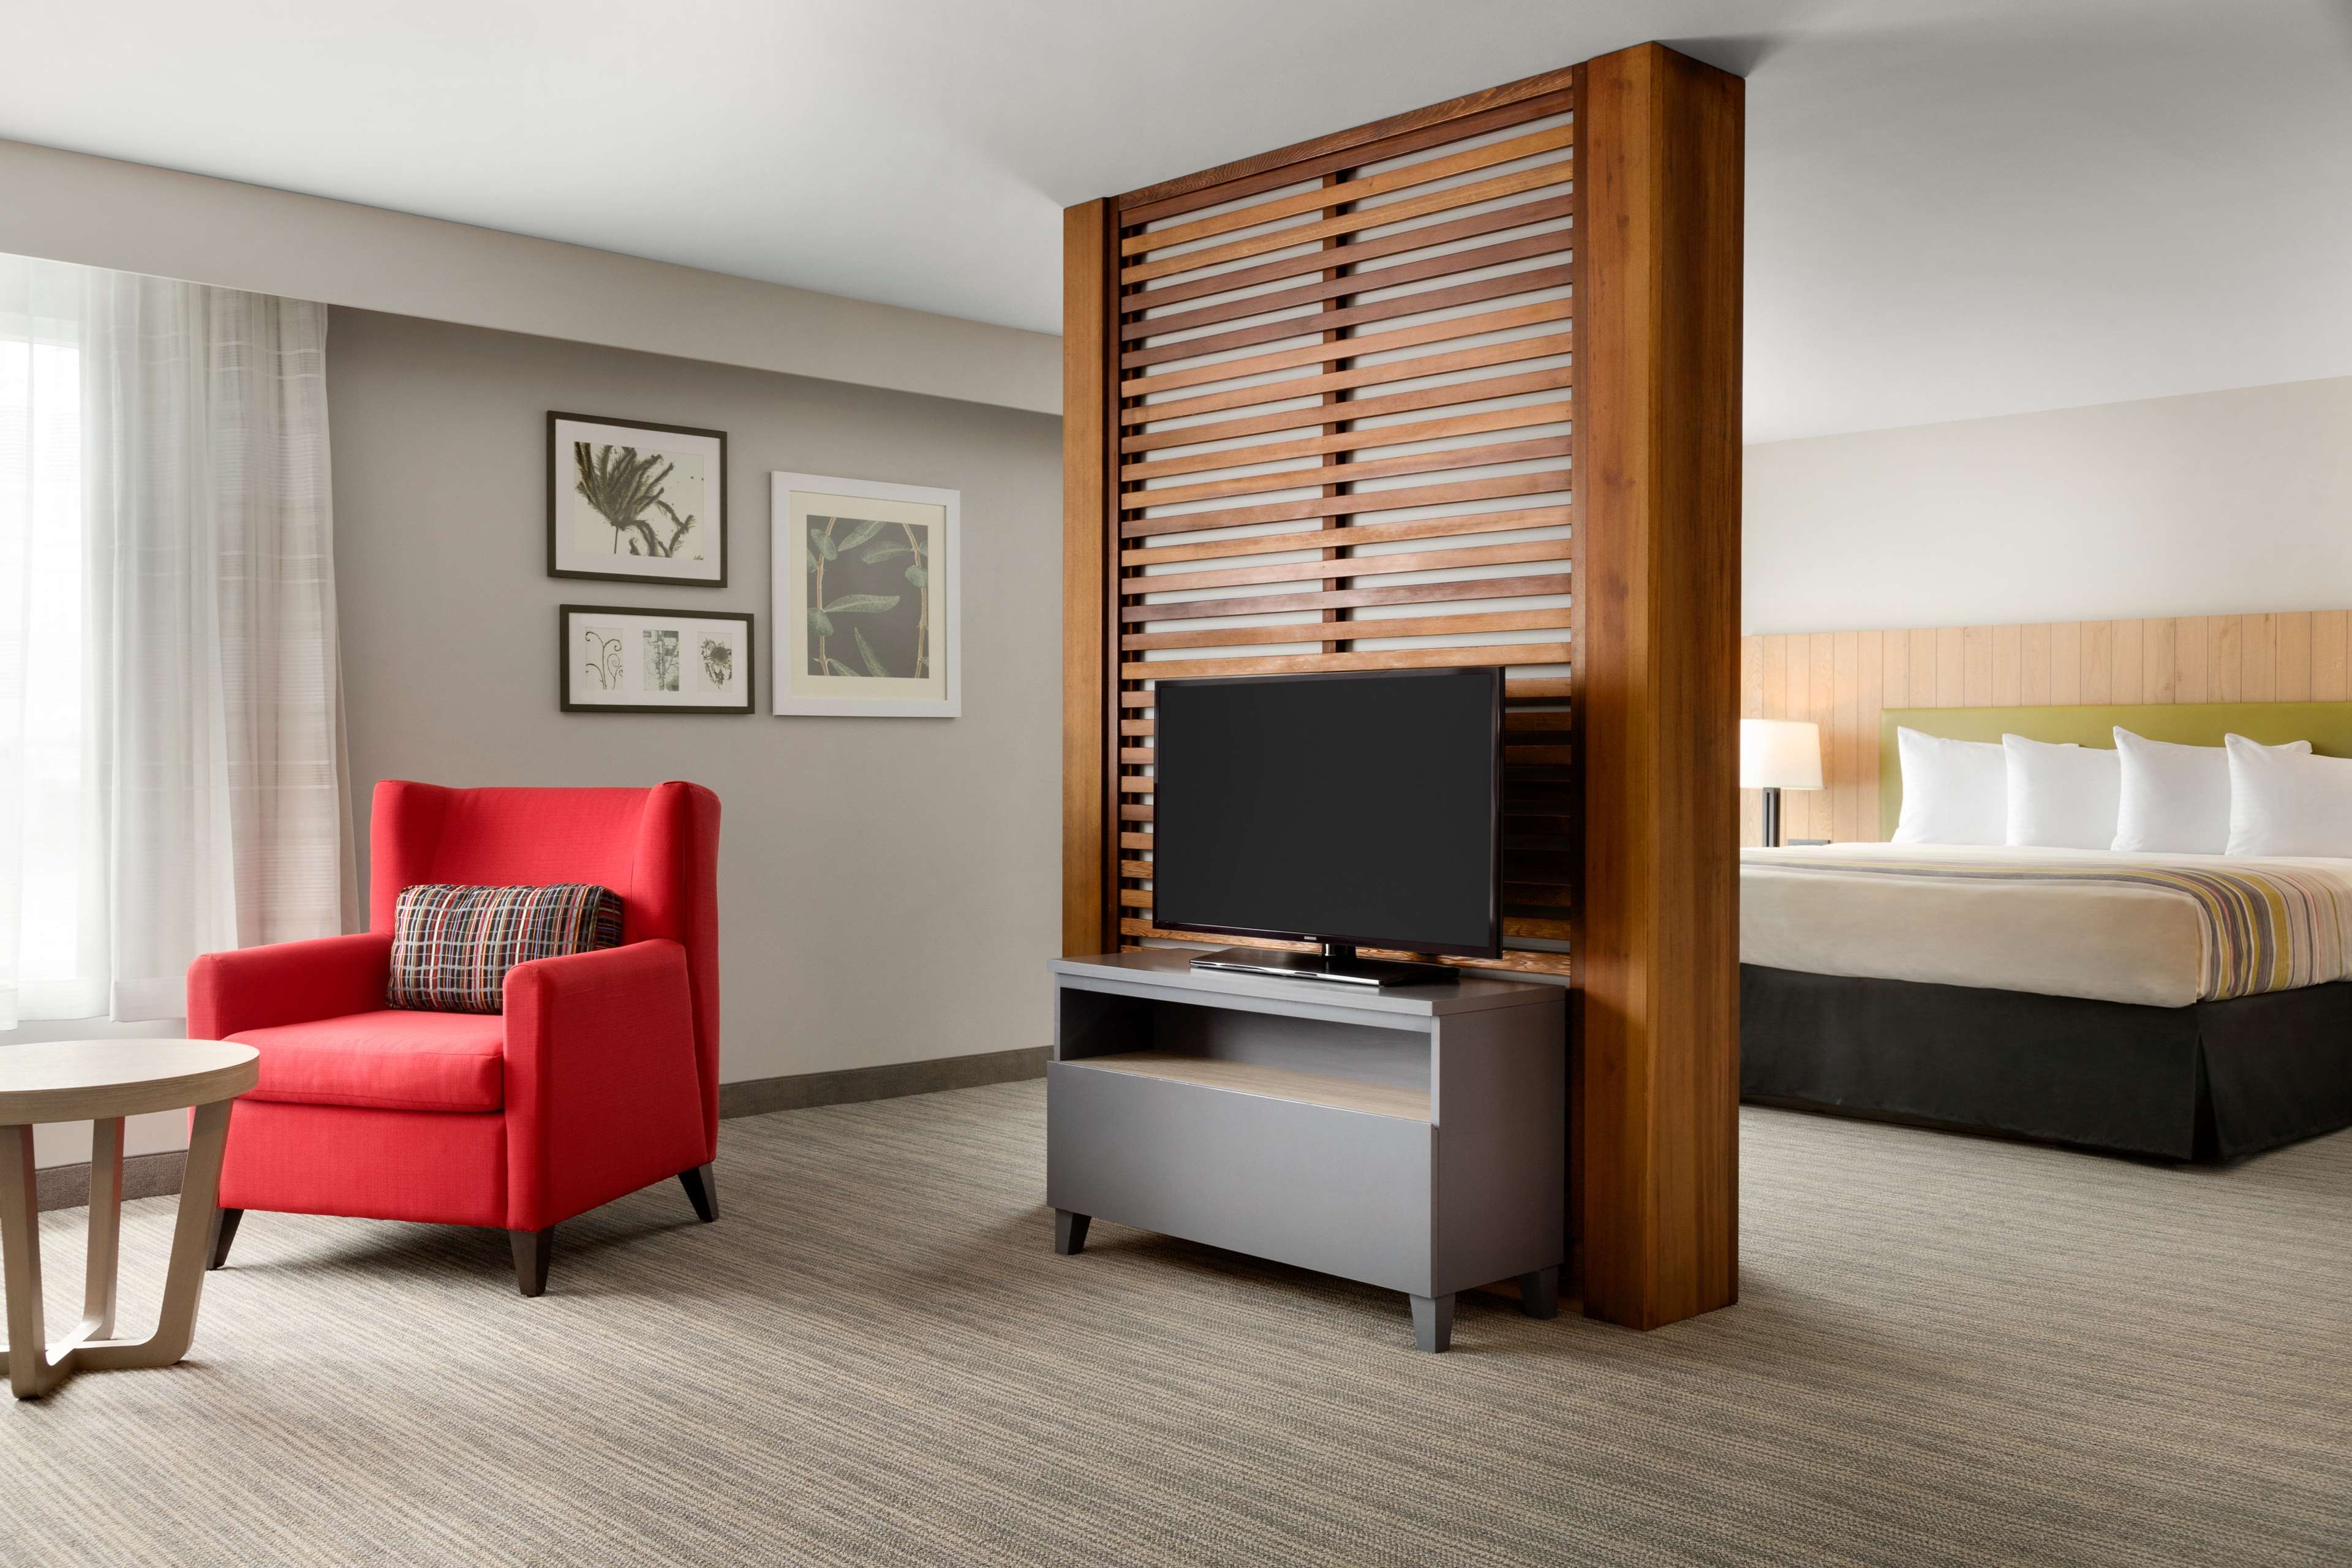 Country Inn & Suites by Radisson, Seattle-Tacoma International Airport, WA